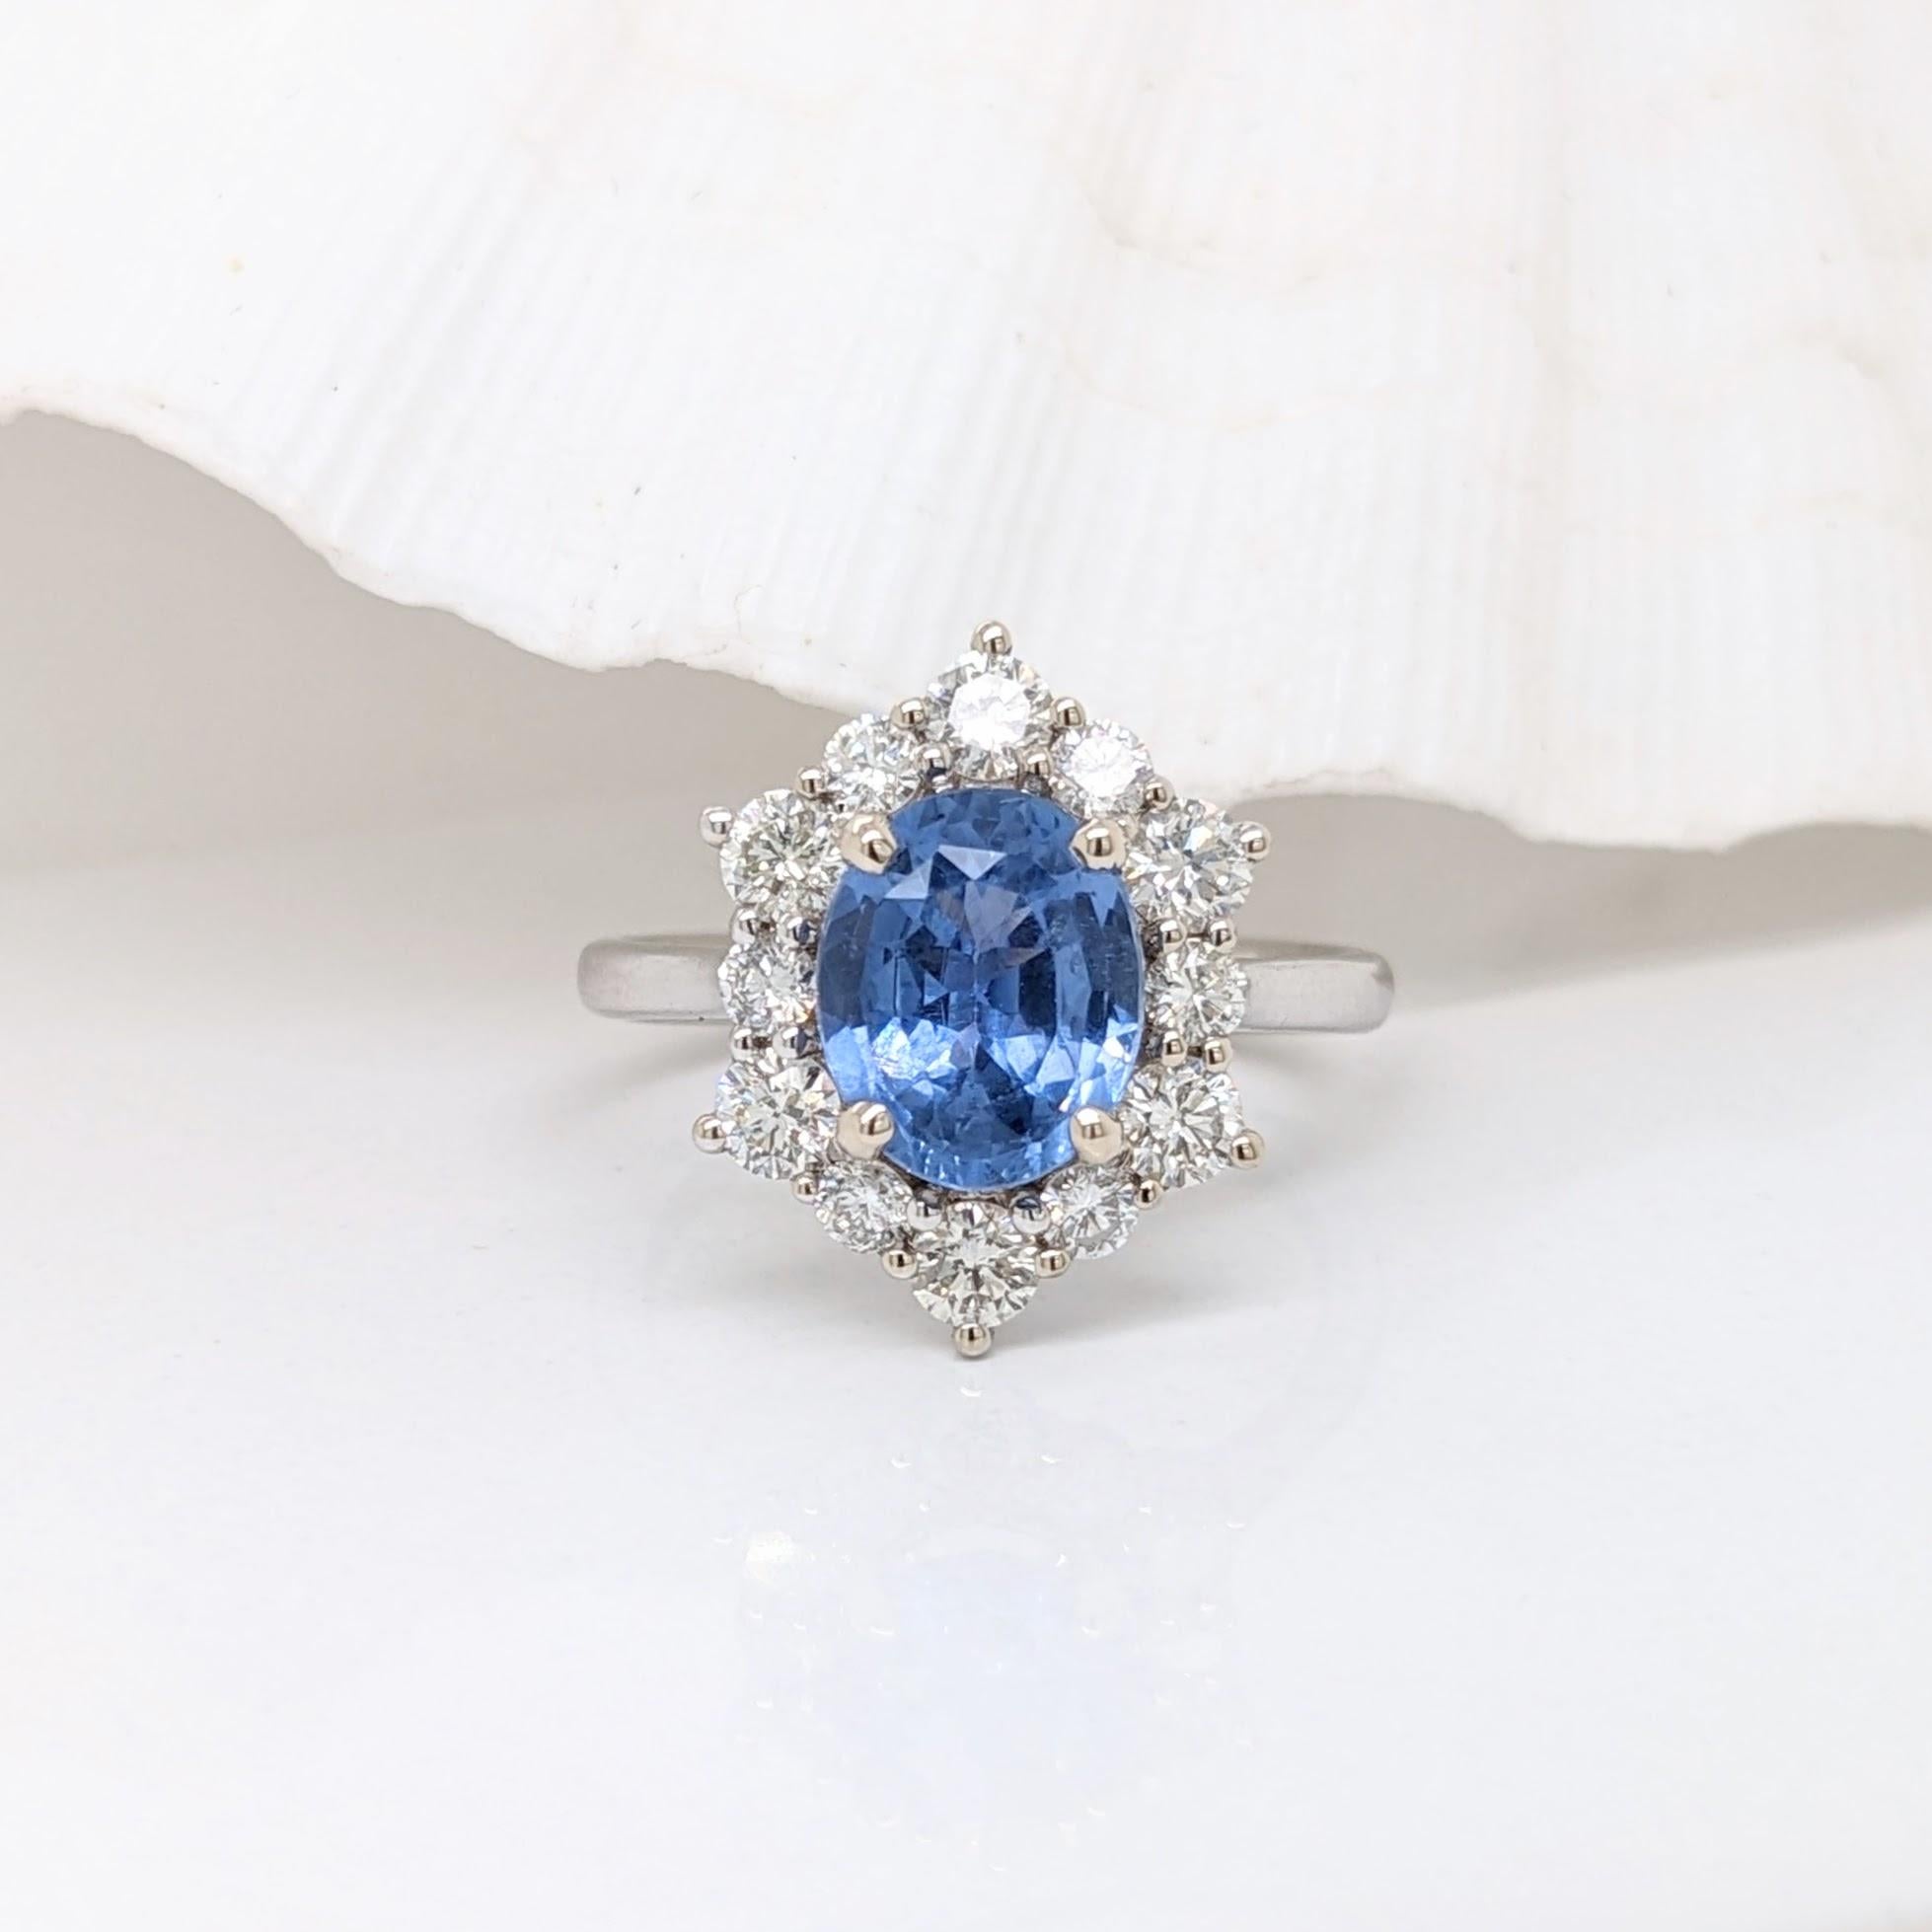 Stunning is an understatement for this ring! The all natural diamond halo and accents perfectly emphasize the blue in this sapphire from Ceylon. The halo design gives a slightly vintage feel but in the most elegant way. This ring is now ready to